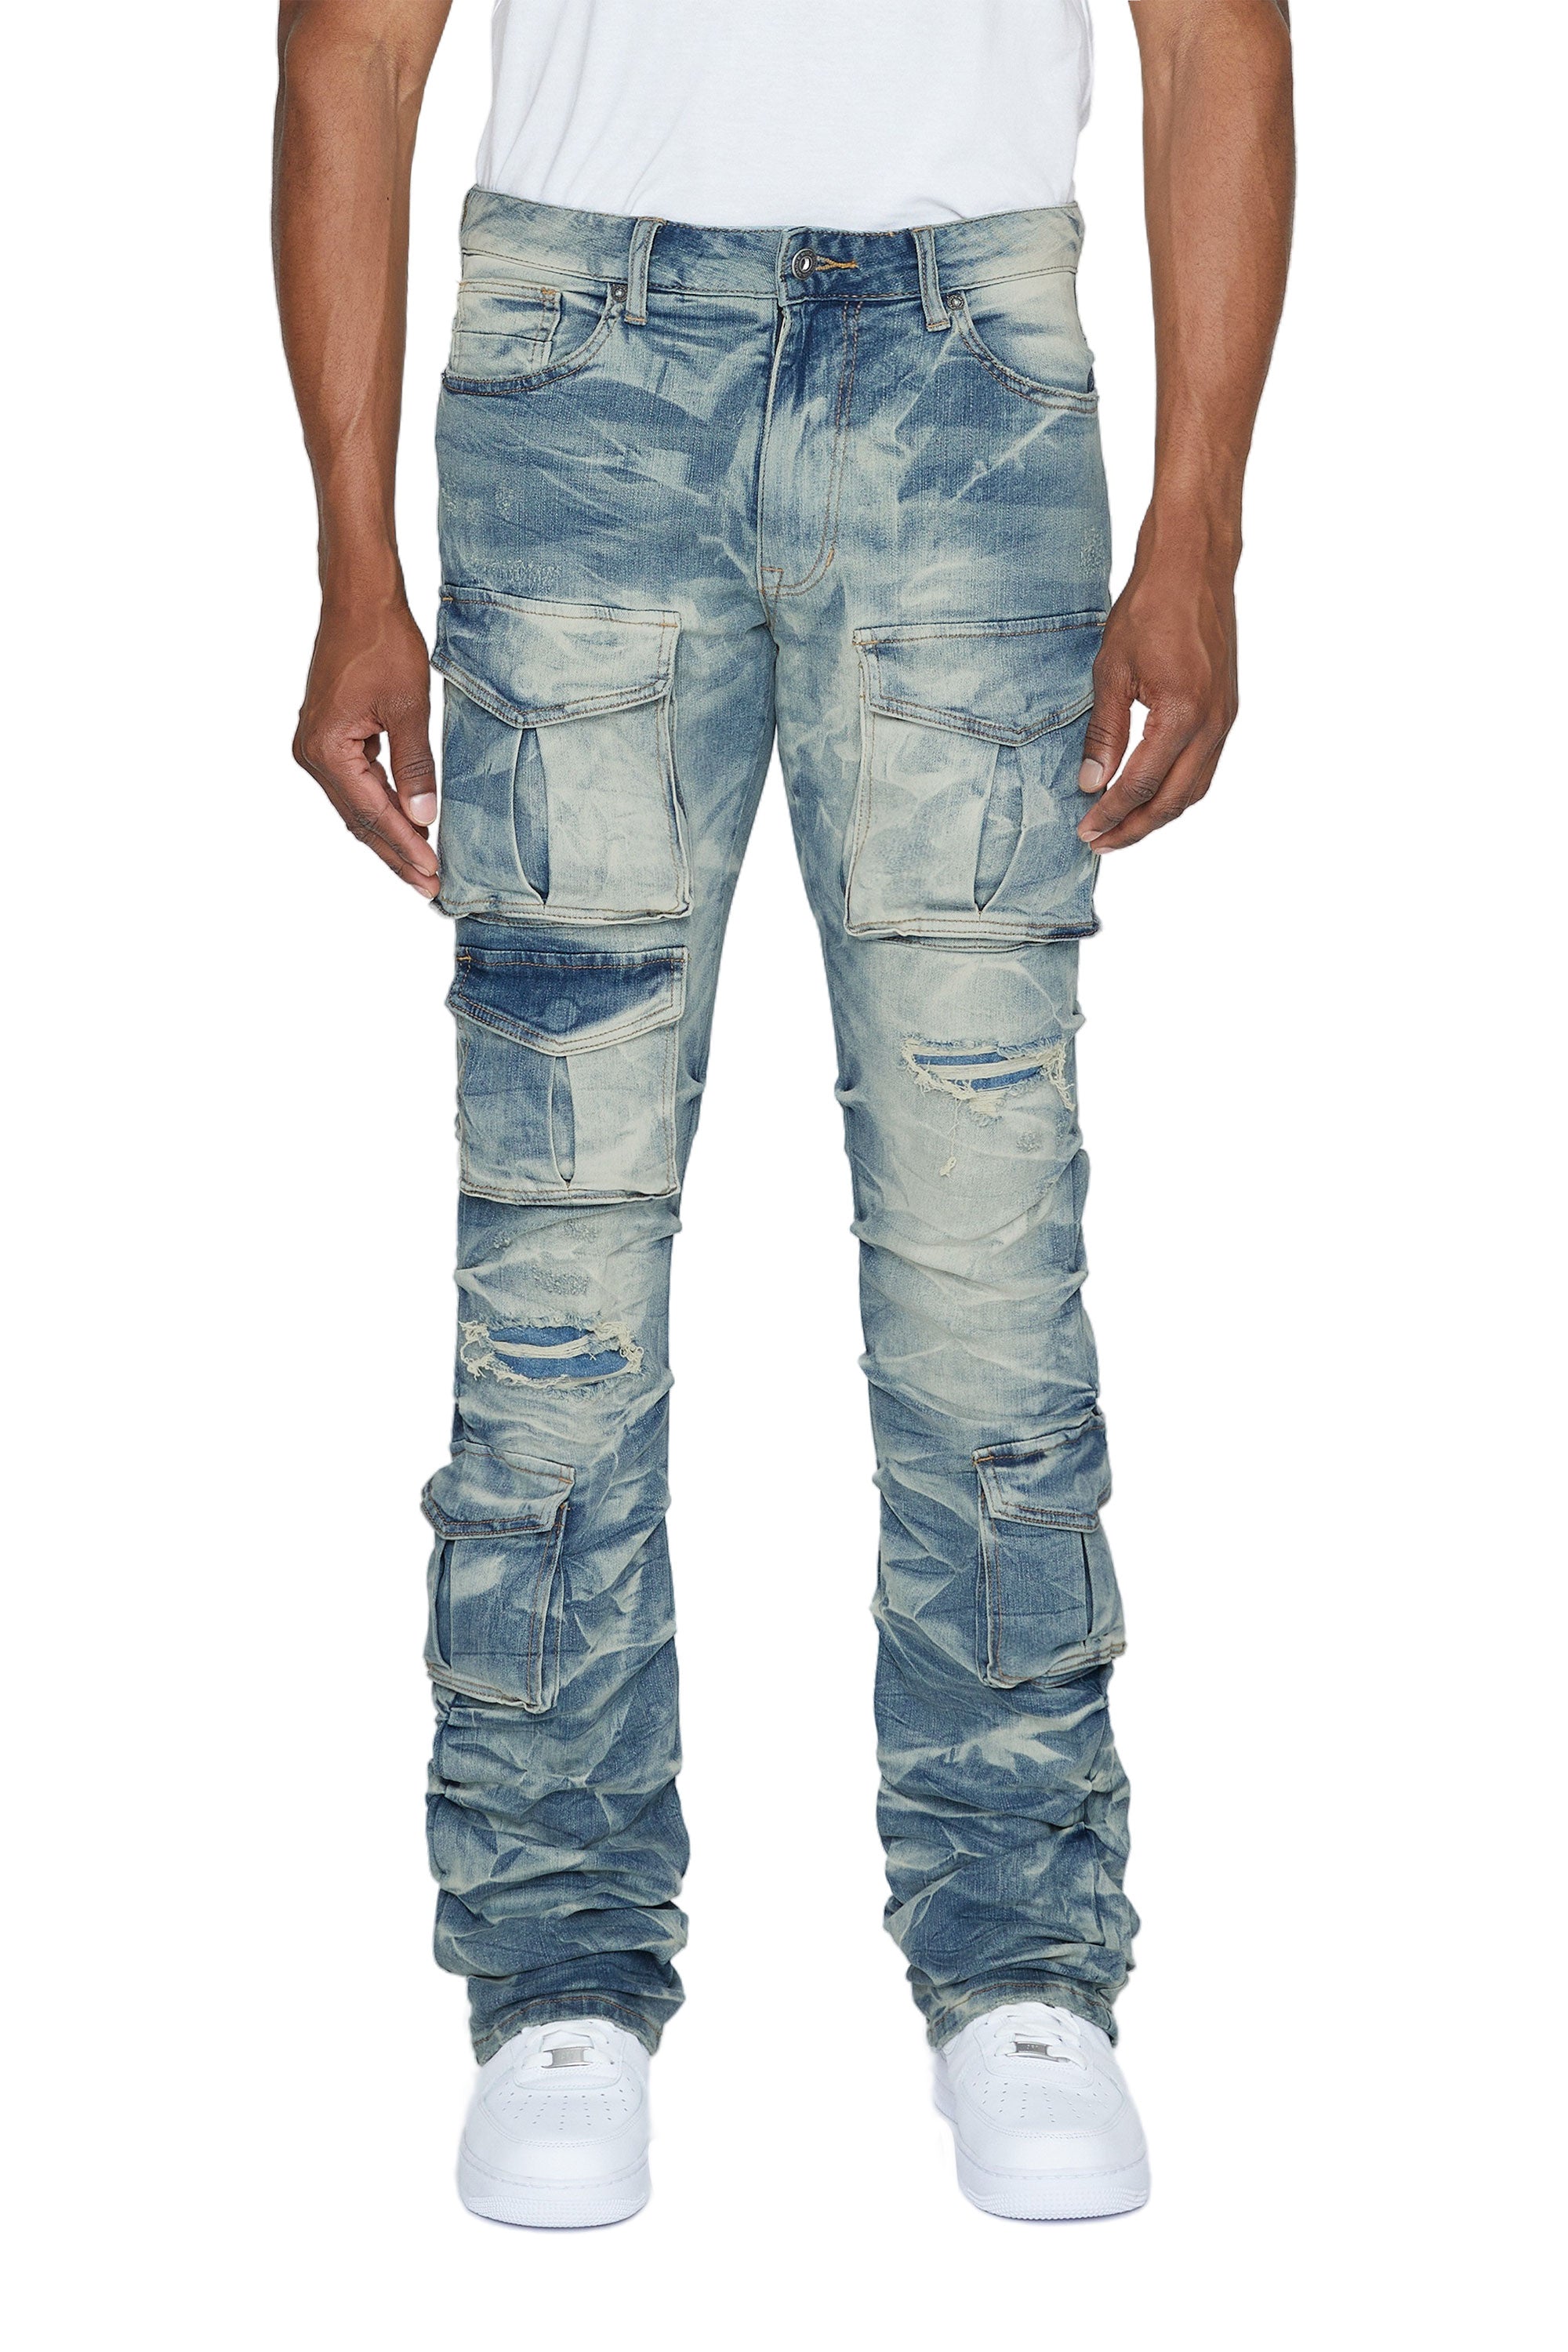 Stacked Utility Denim Jeans - Clyde Blue